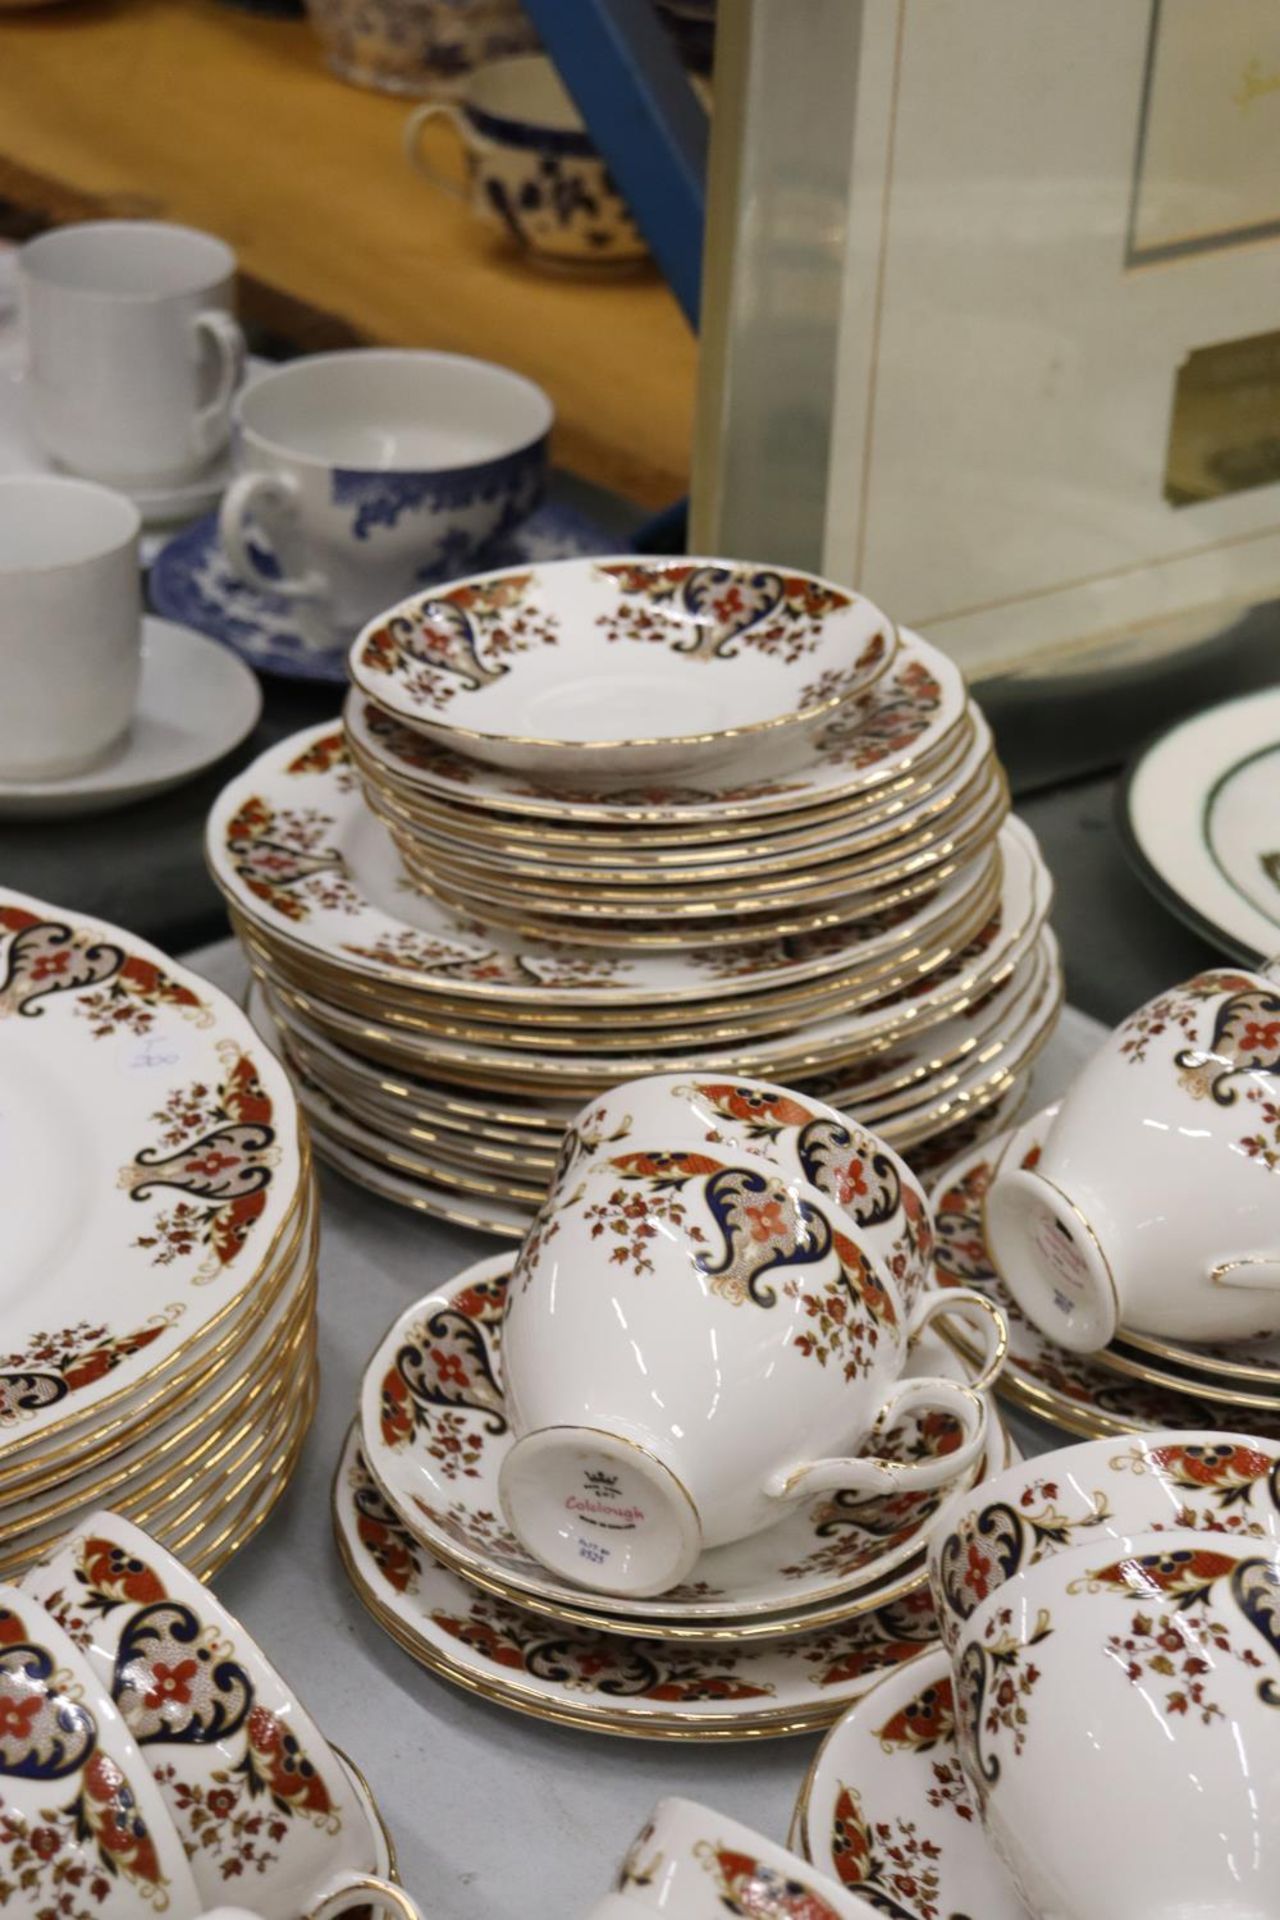 A COLCLOUGH "ROYALE" PART DINNER SERVICE TO INCLUDE A TEAPOT, TEACUPS, PLATES, DISHES, ETC., - Image 7 of 8